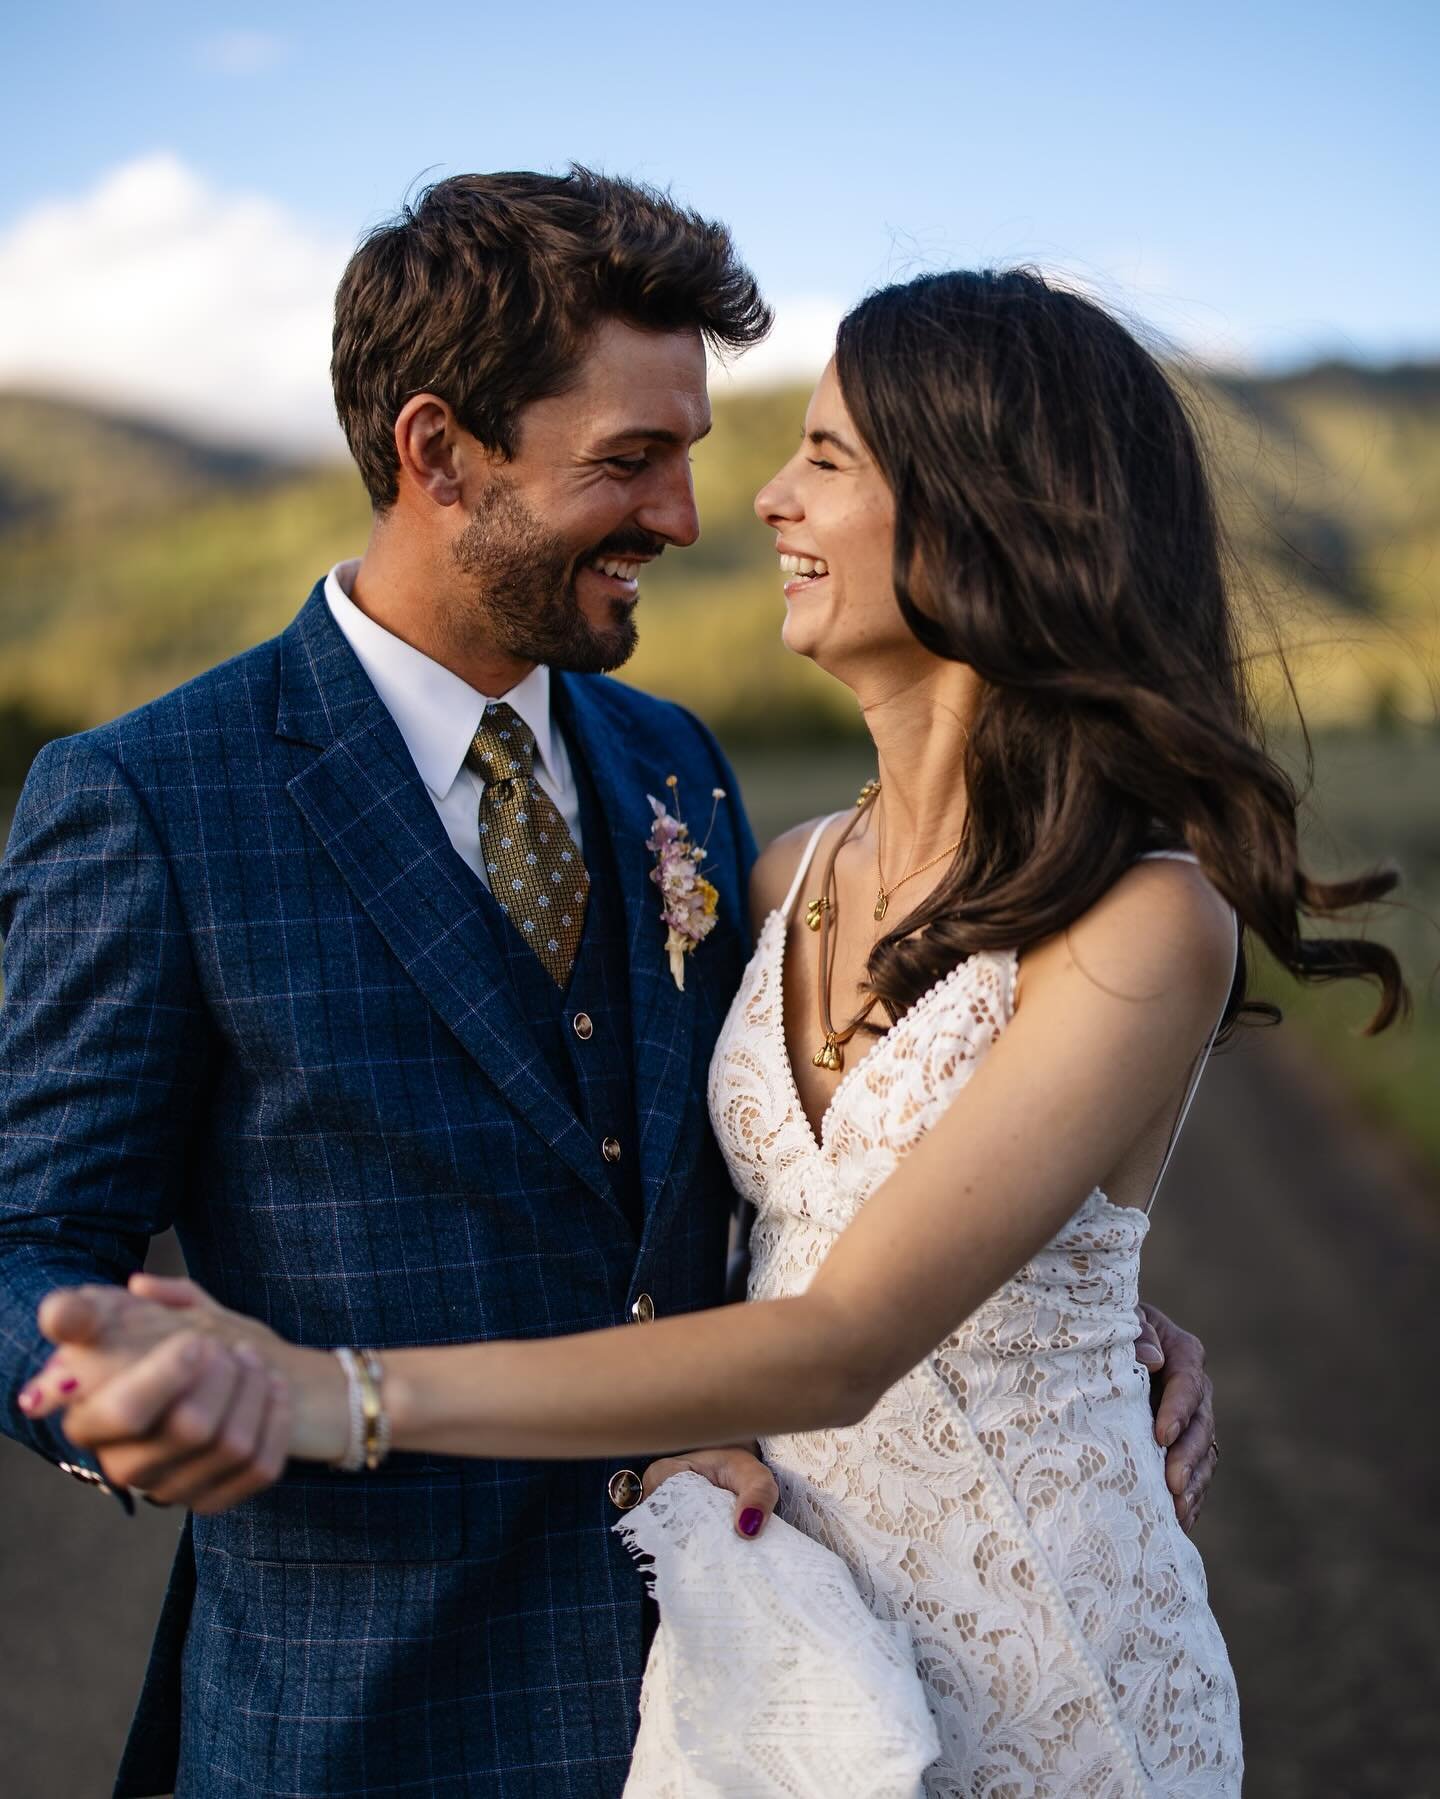 6.18.23 | McKenna + Ben

NEW BLOG POST &gt;&gt; I&rsquo;m SO excited to finally share this stunning mountain wedding that took place last summer! McKenna and Ben had an intimate, romantic, and stylish day in Stanley, Idaho, captured exquisitely by @j